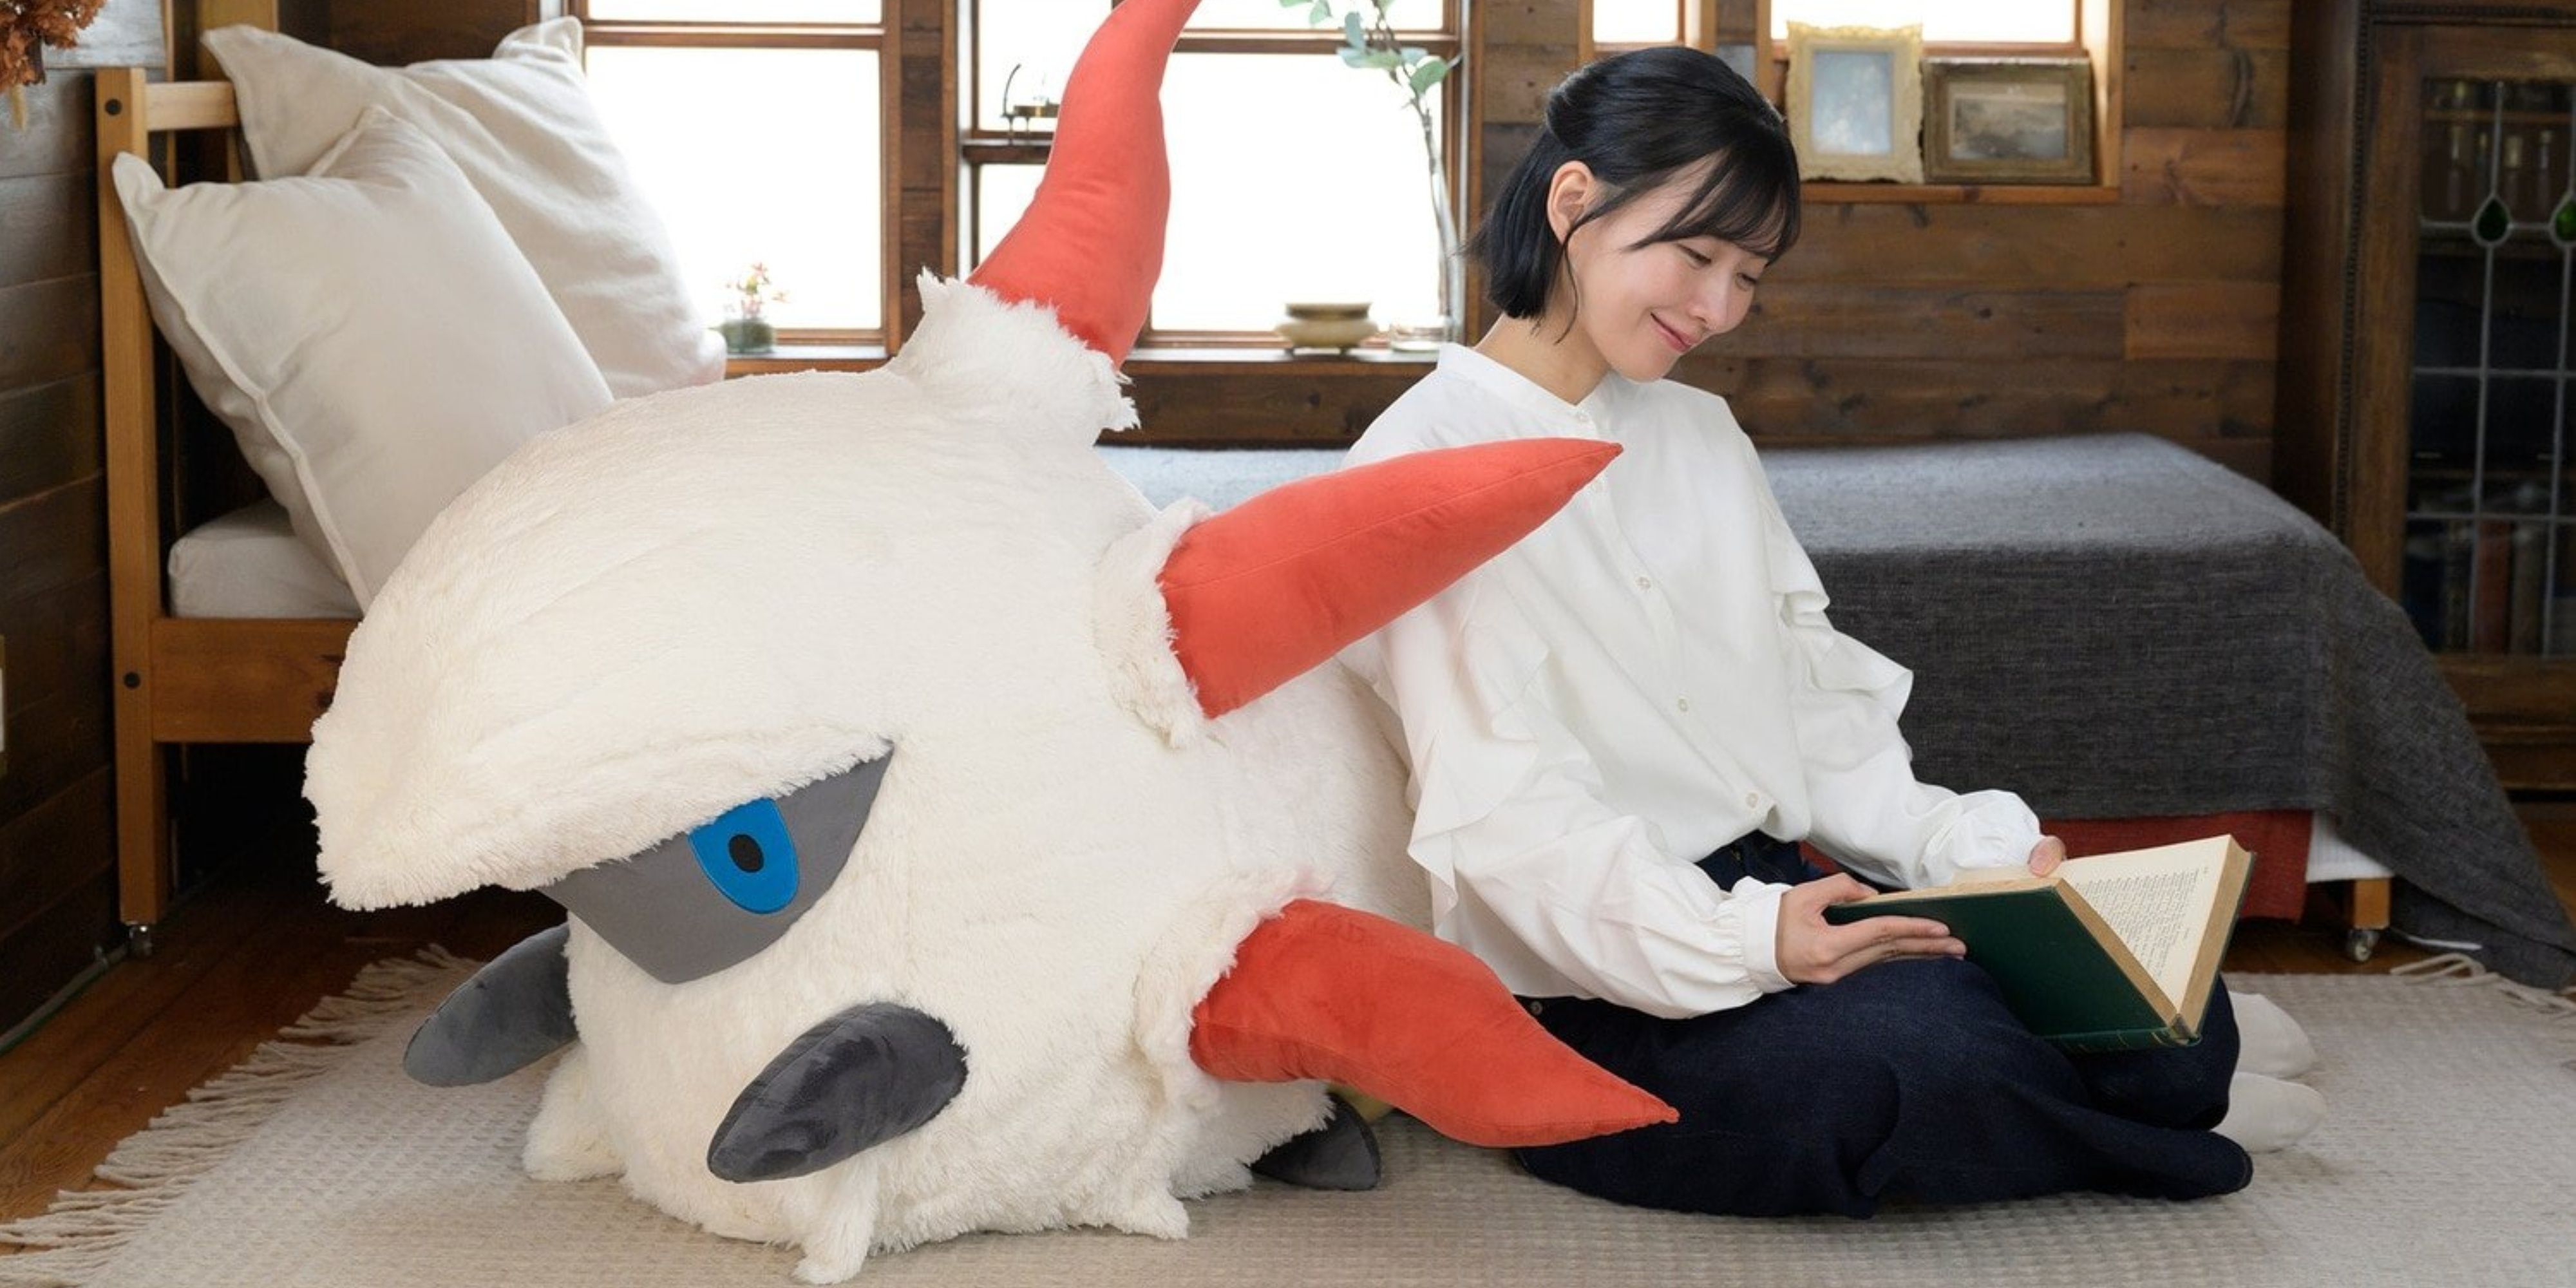 woman resting on a life-size larvesta plush while she reads a book